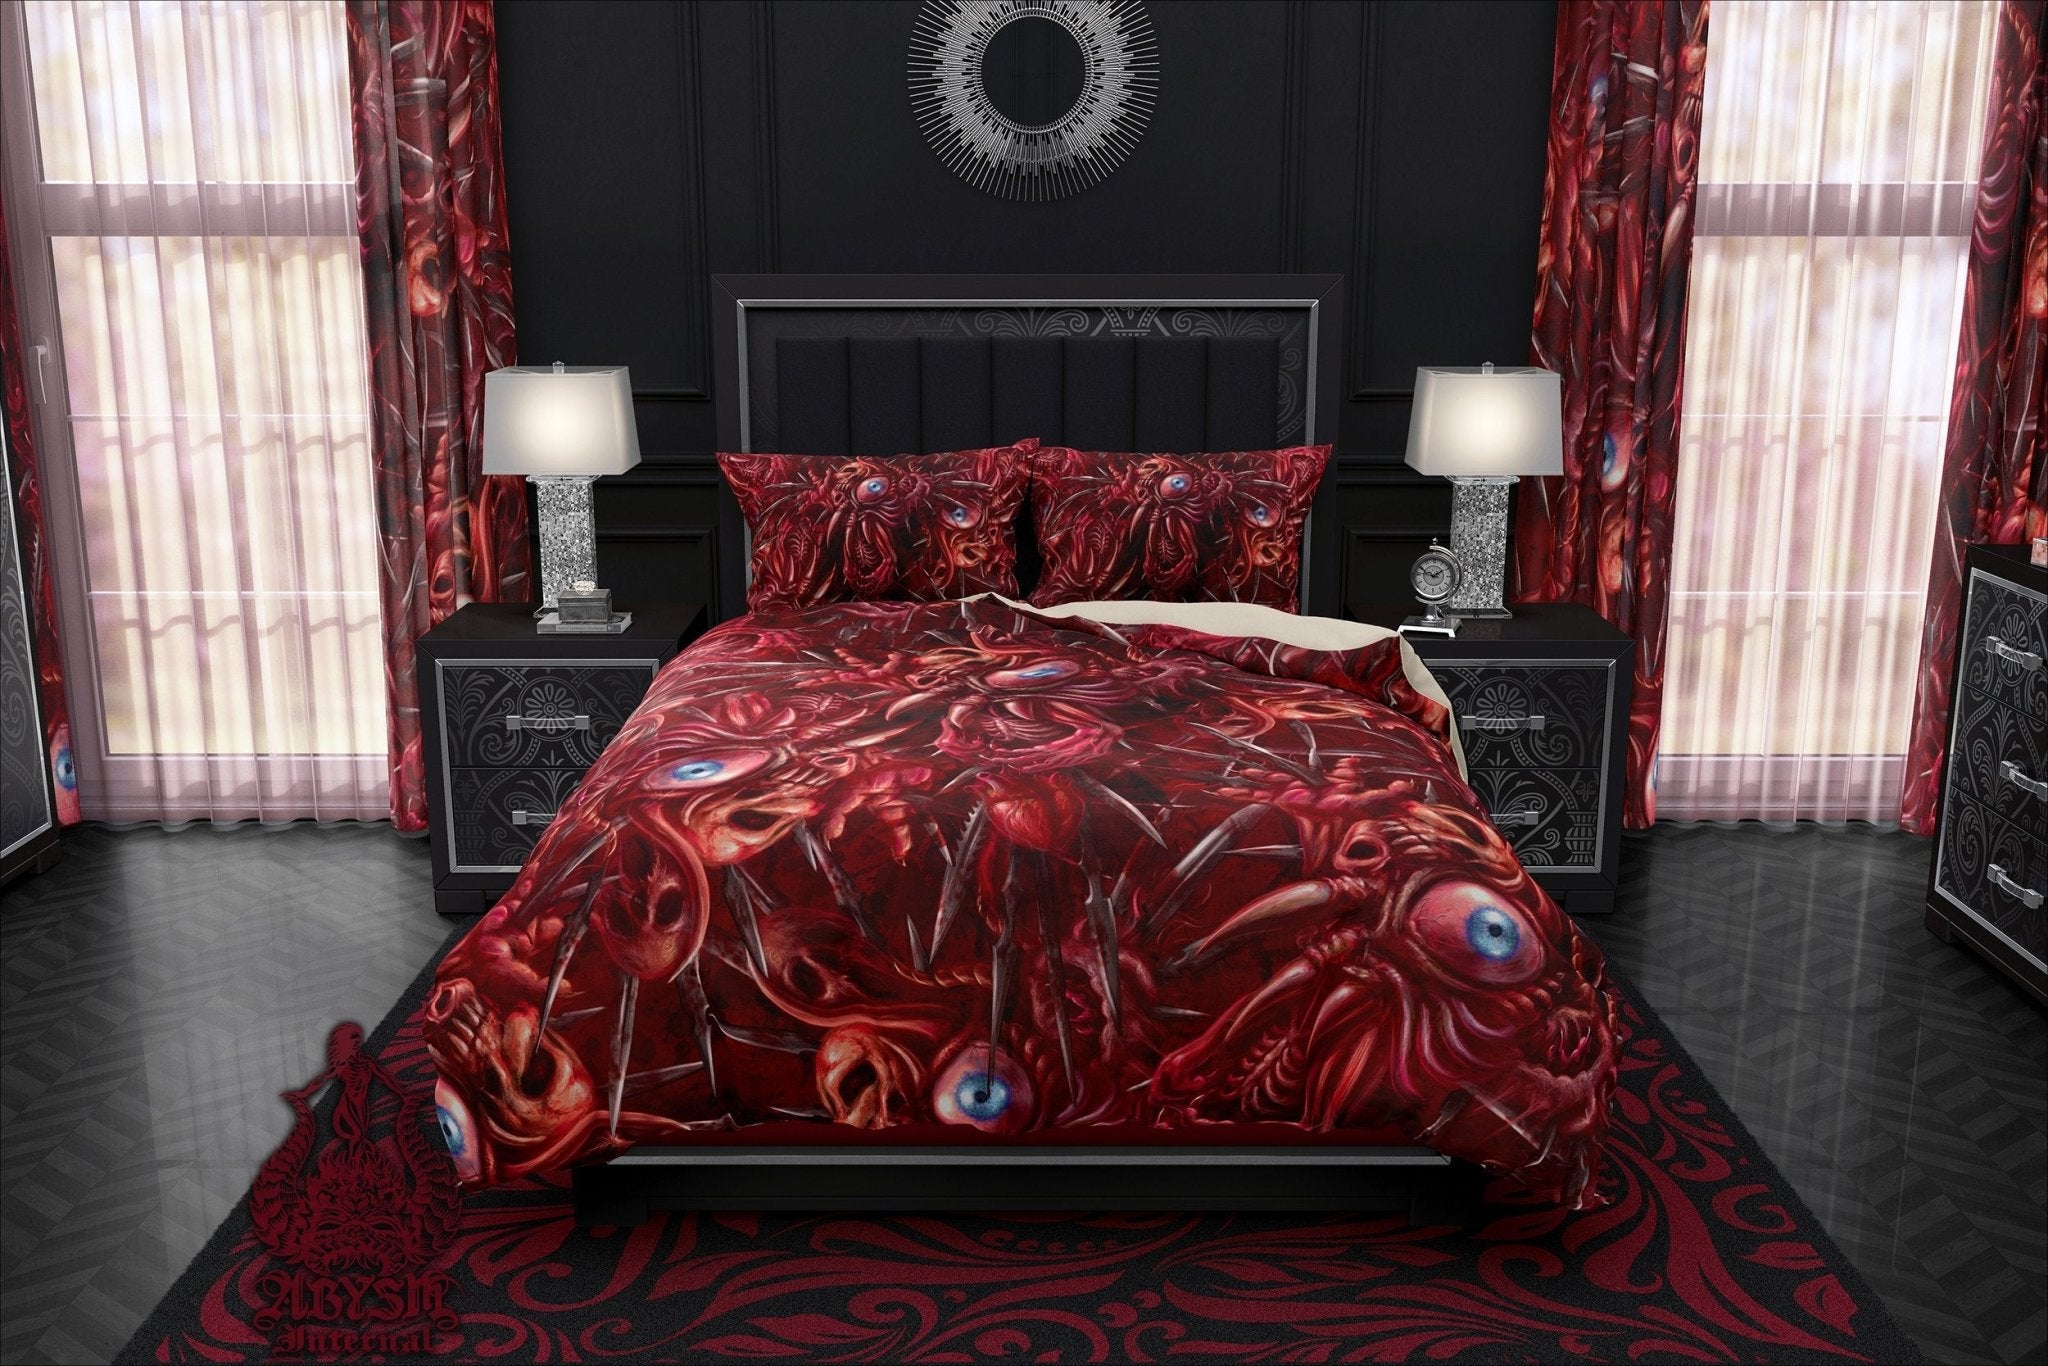 Horror Bedding Set, Comforter and Duvet, Halloween Bed Cover and Bedroom Decor, King, Queen and Twin Size - Gore and Blood Cross - Abysm Internal